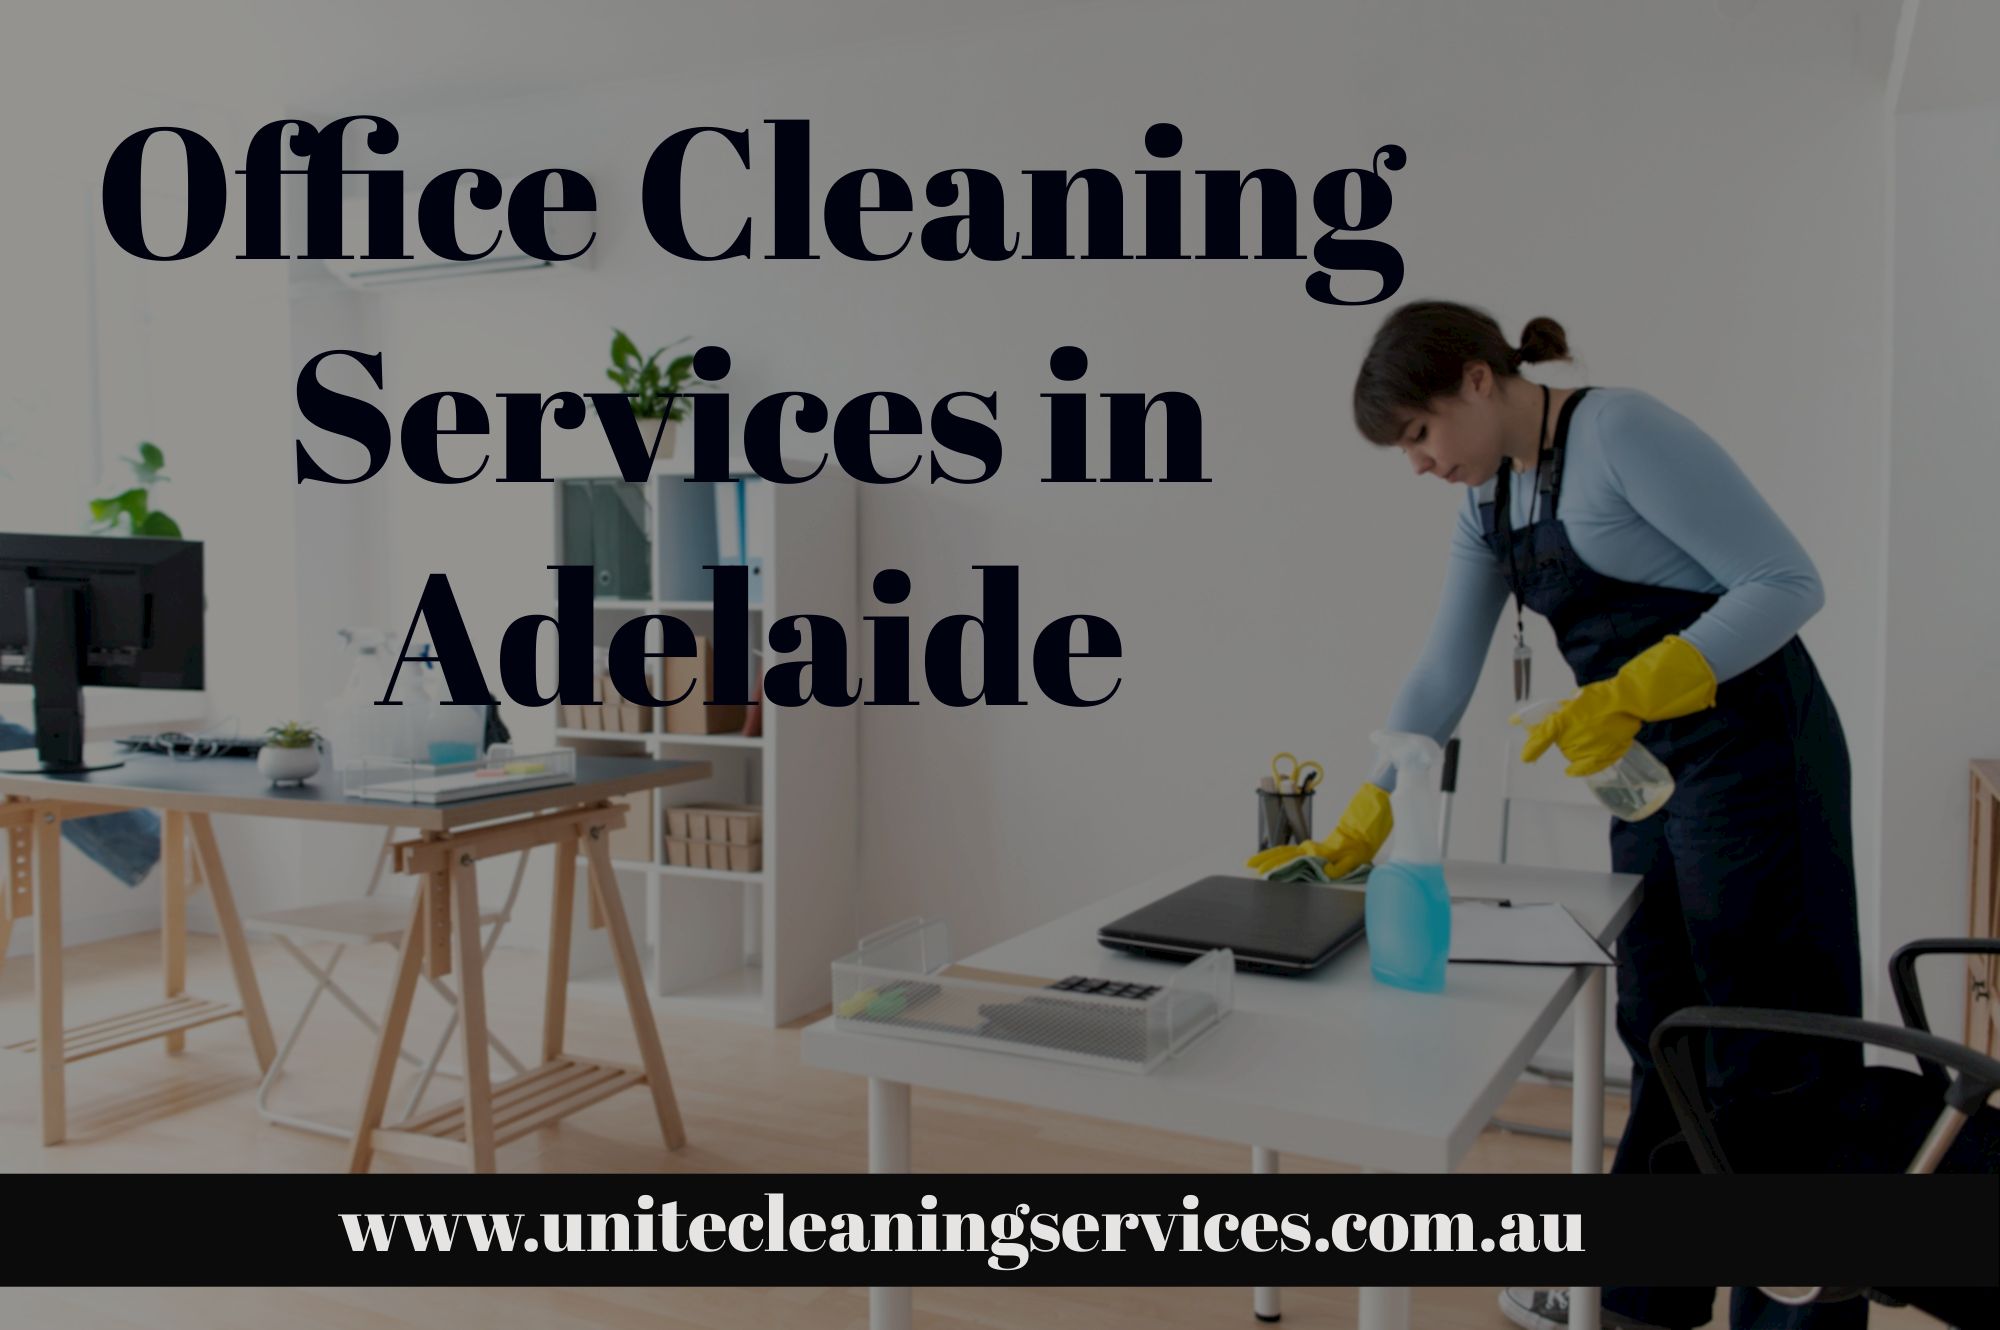 Revitalize Your Workplace with Premier Office Cleaning Services in Adelaide!